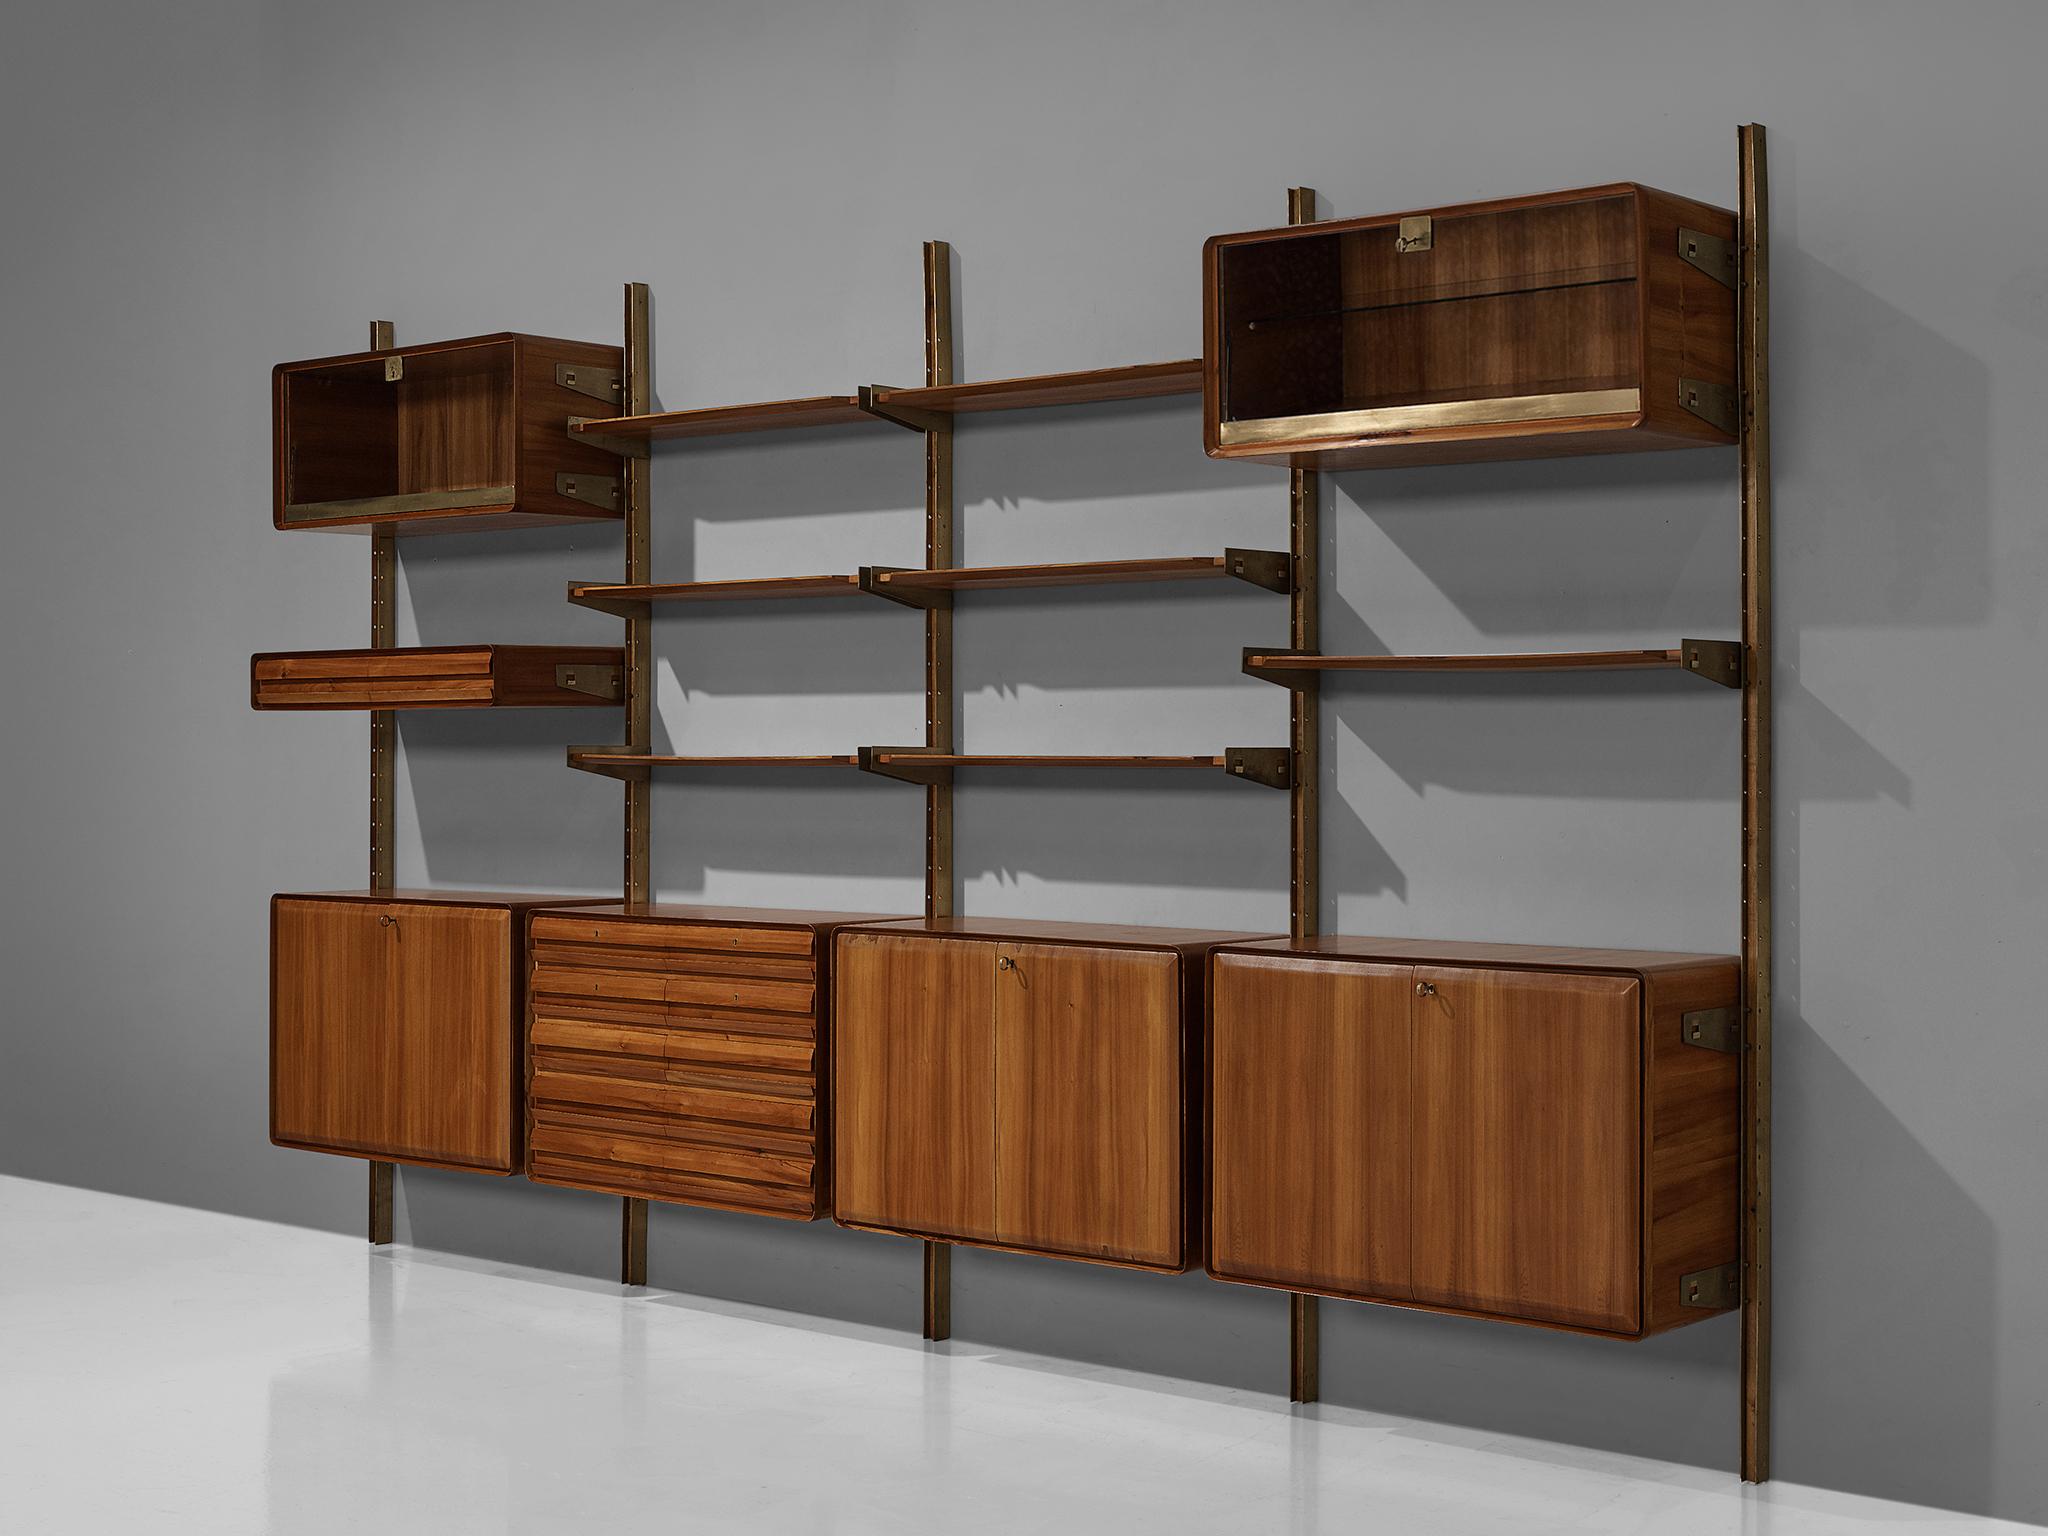 Cabinet, wood, glass and metal, Italy, 1960s.

The monumental wall-mounted cabinet consists of four wall sections with various different storage facilities. The shelves and compartments are mounted on steel profiles. The storage facilities exist